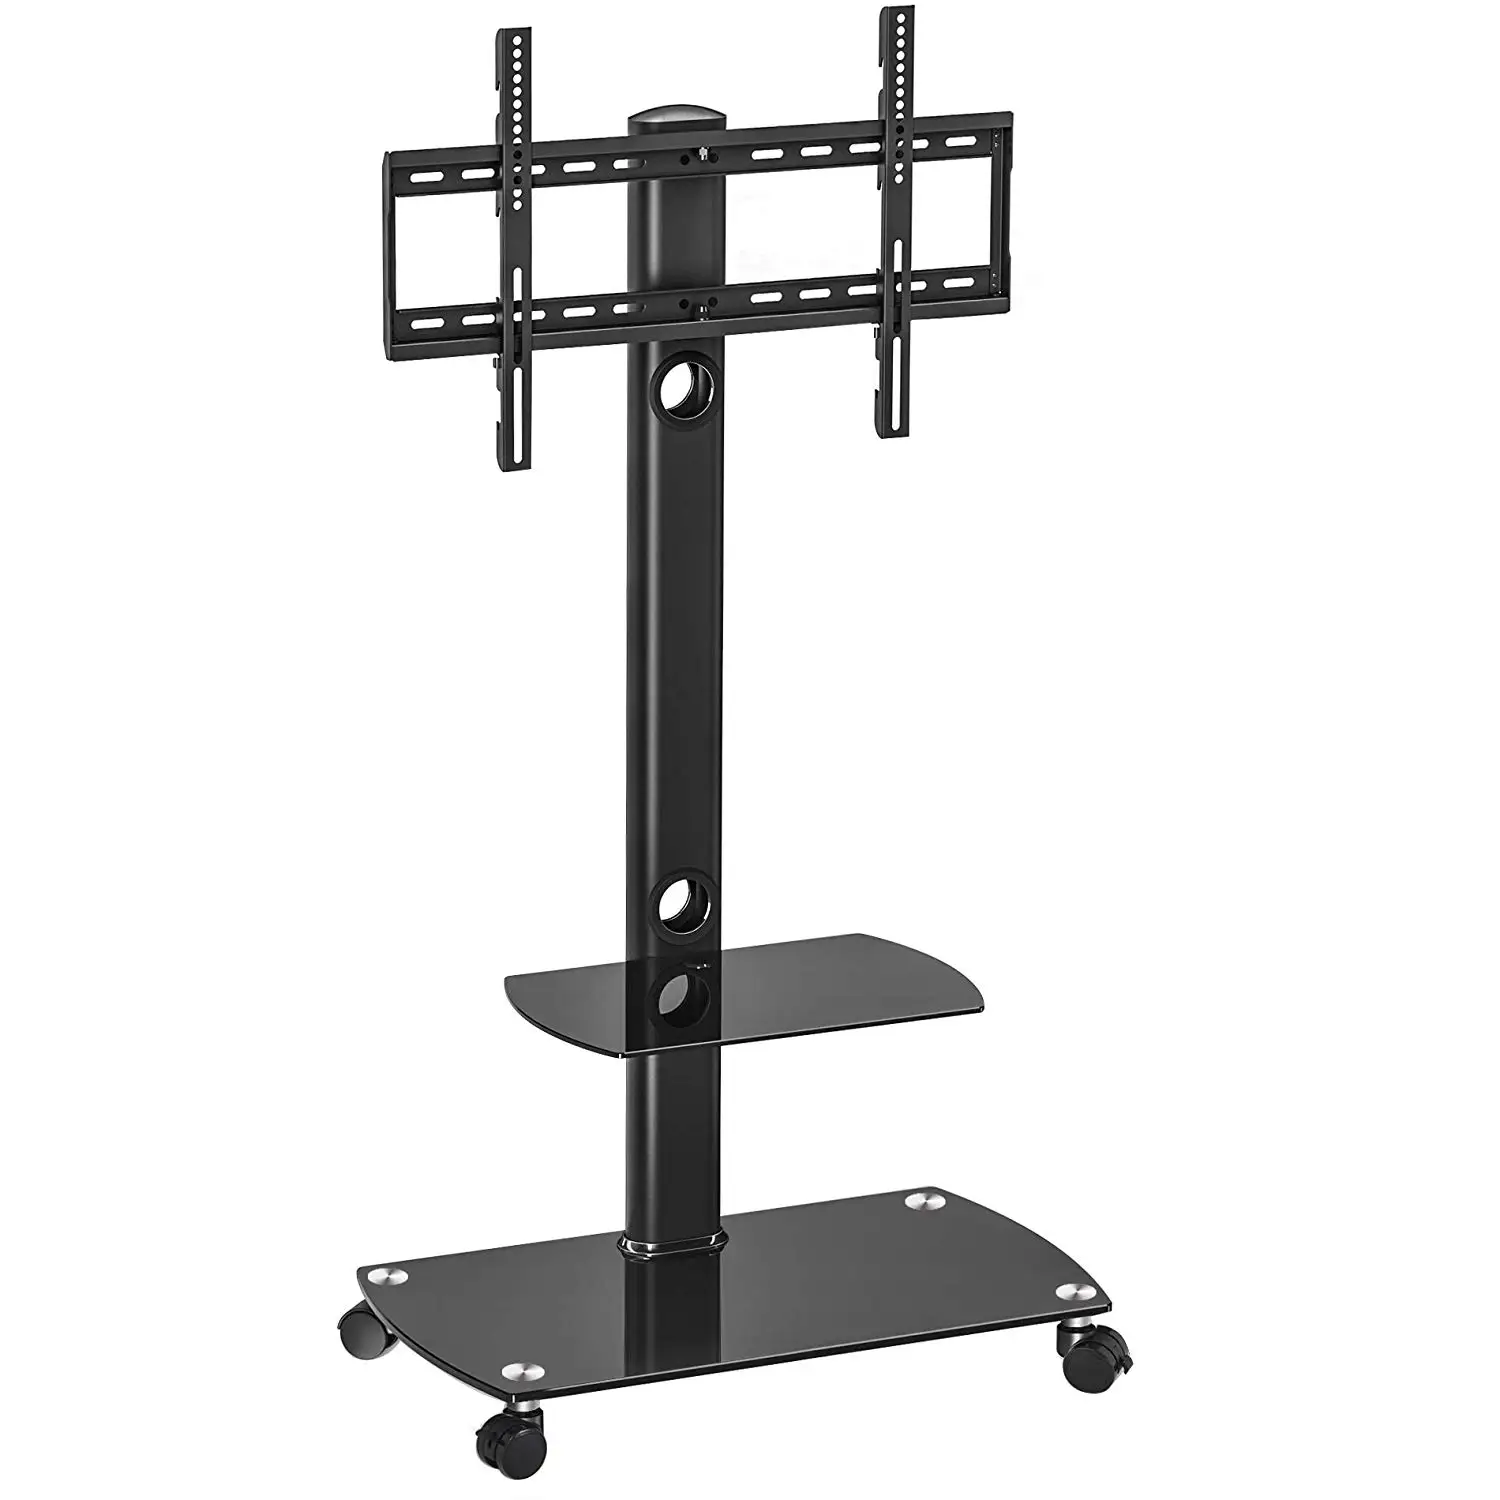 Cheap Tv Stand 65 Inch, find Tv Stand 65 Inch deals on ...